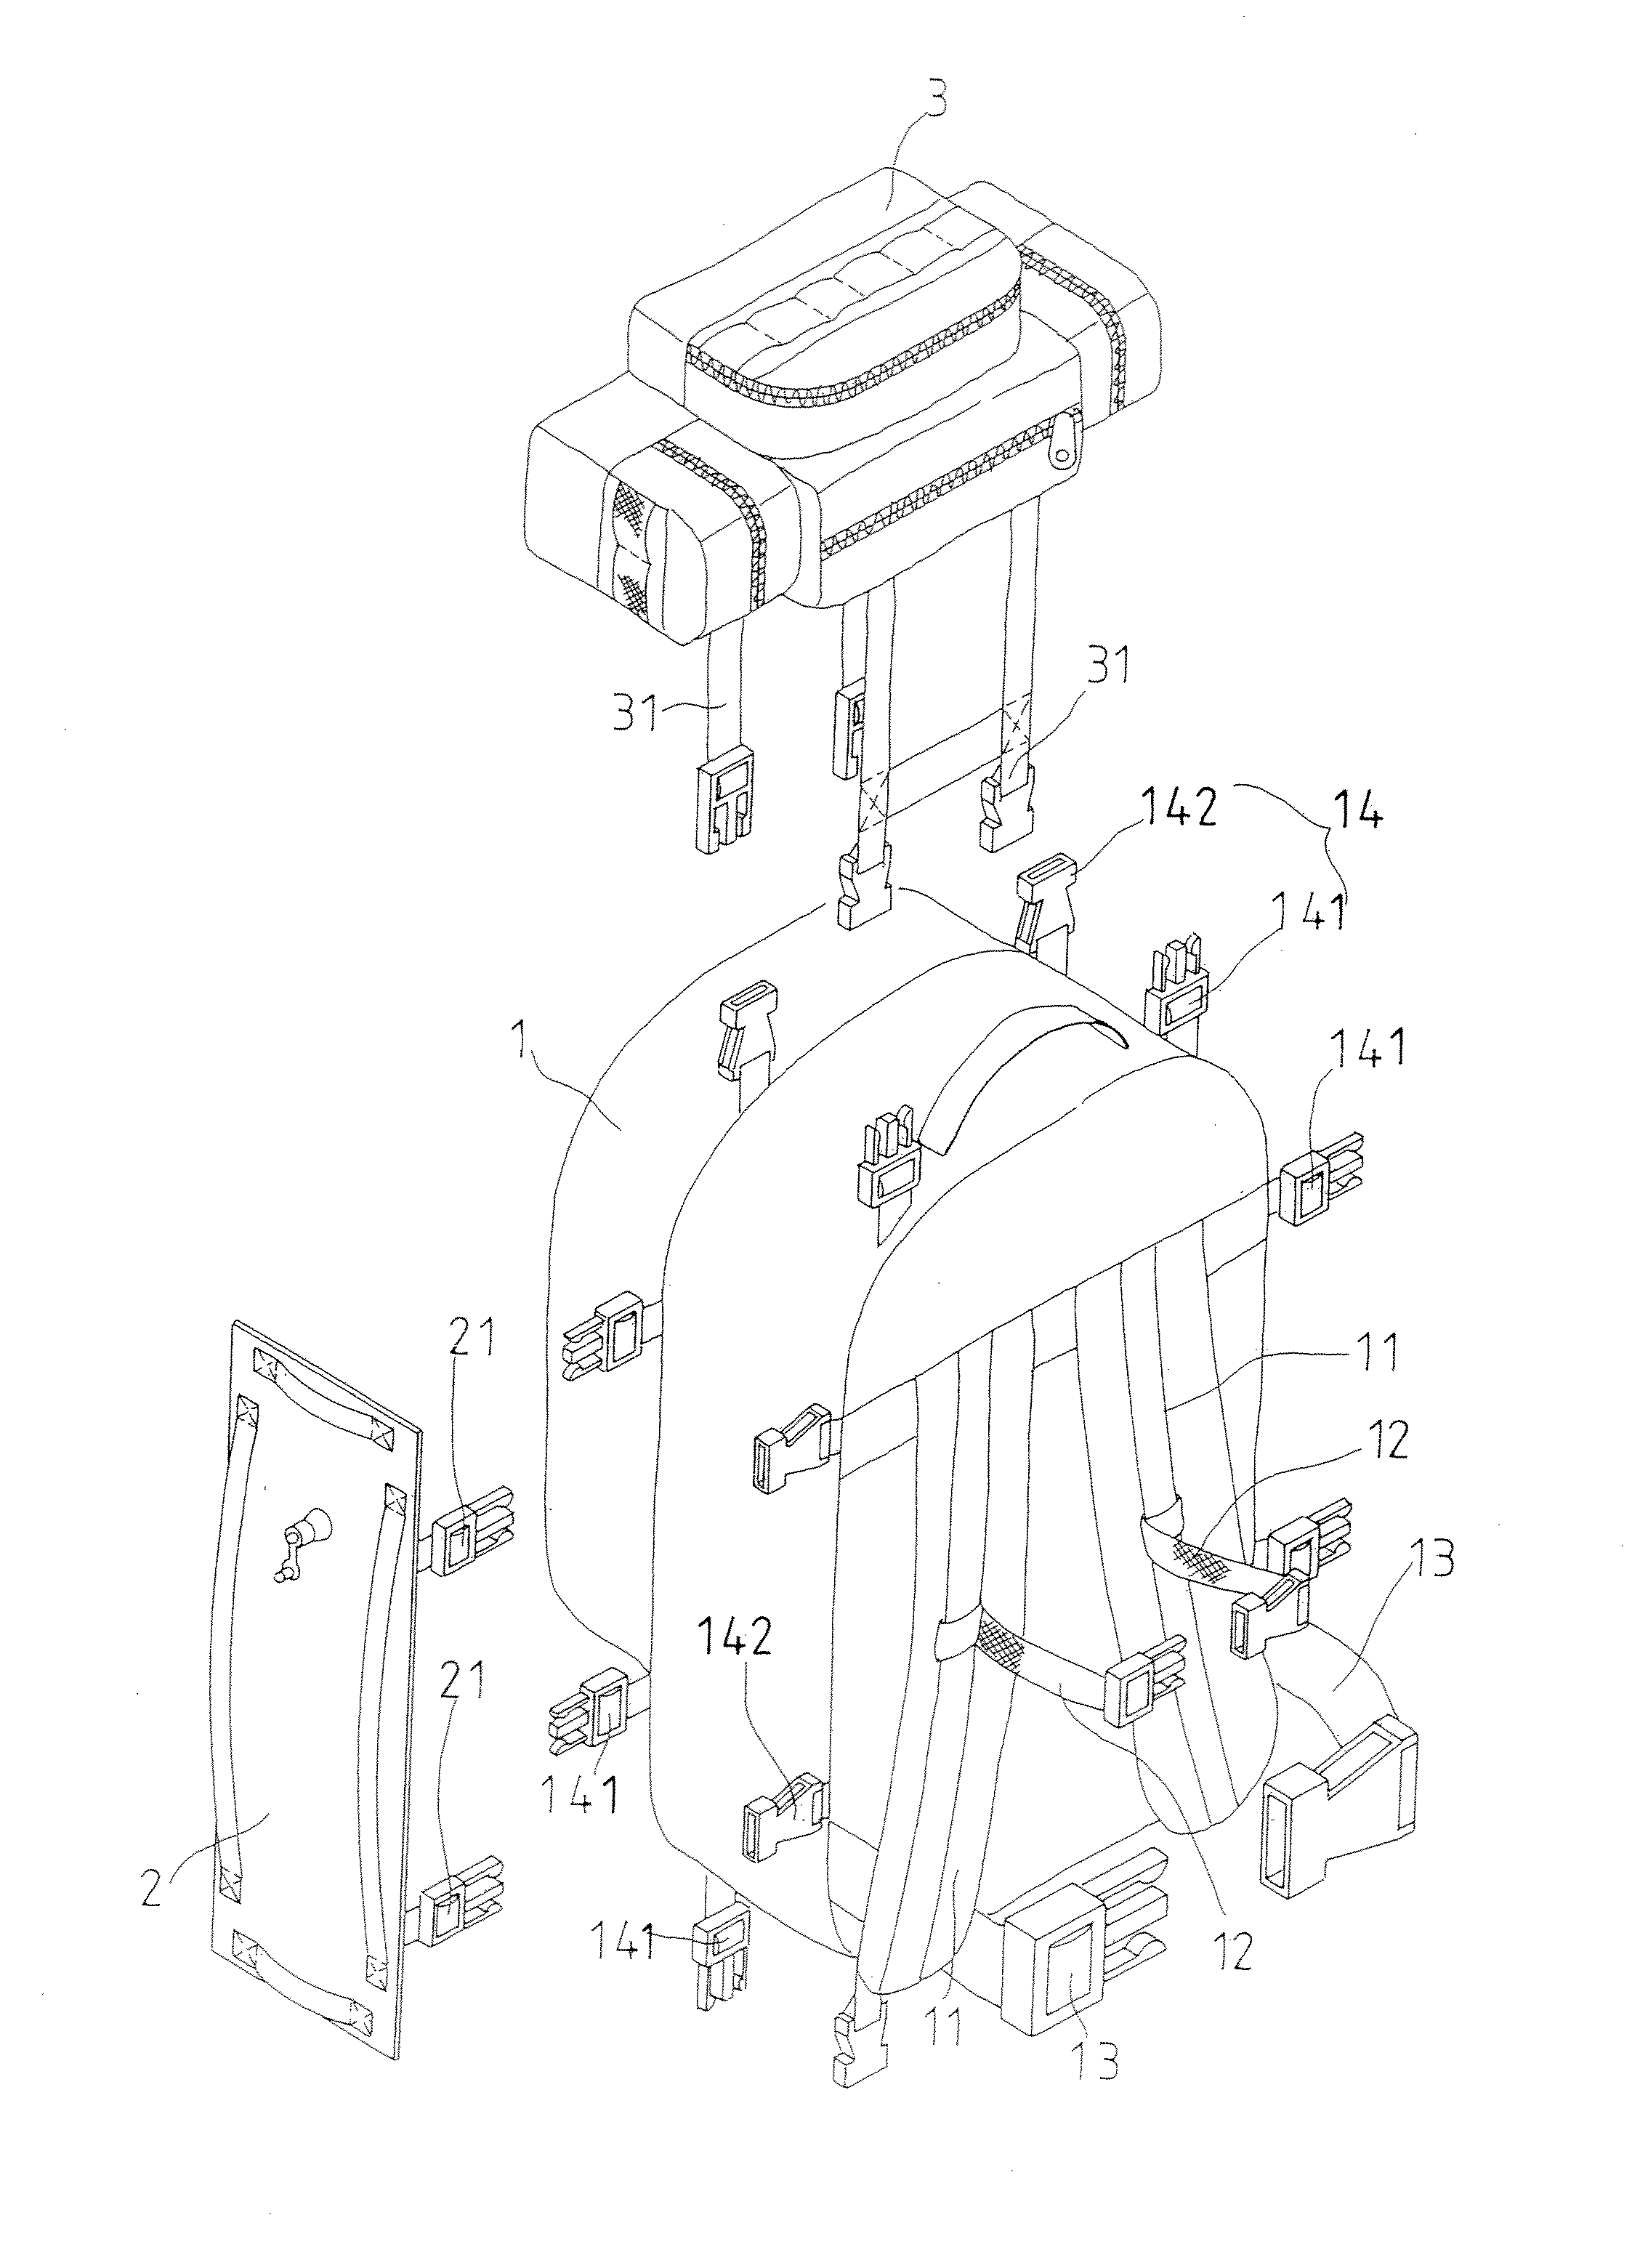 Backpack structure having lifesaving function